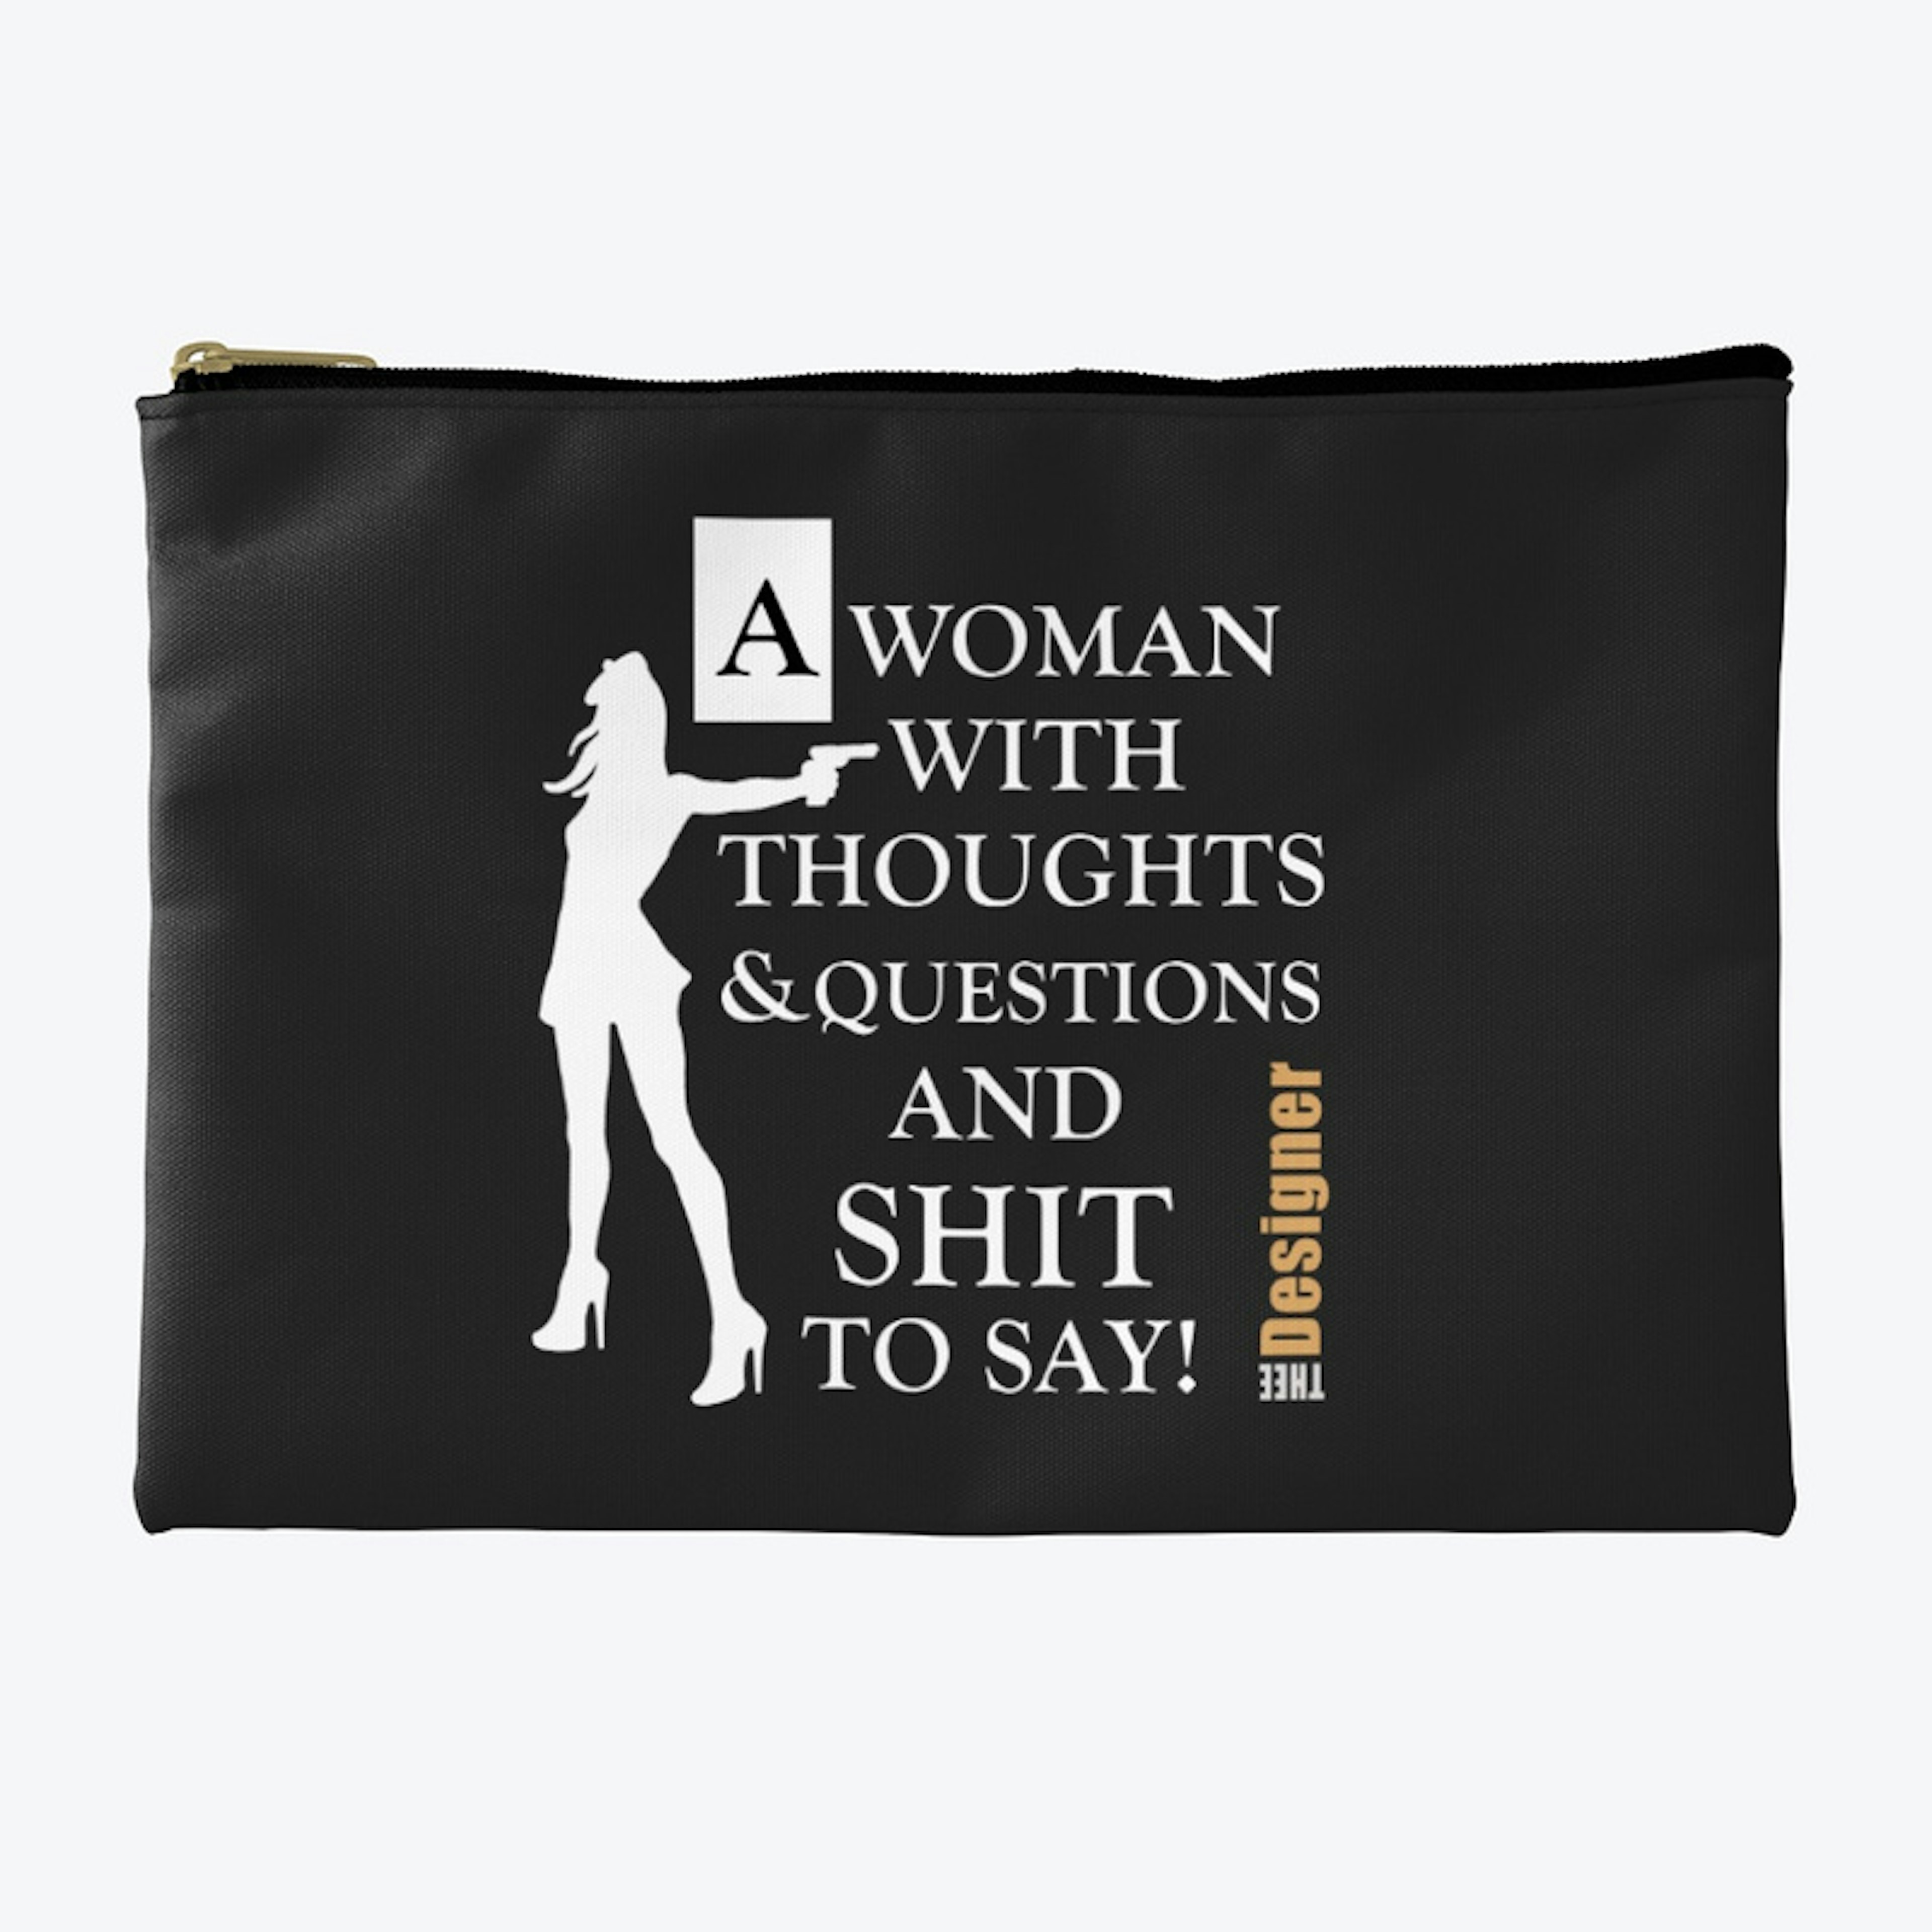 A Woman with Thoughts